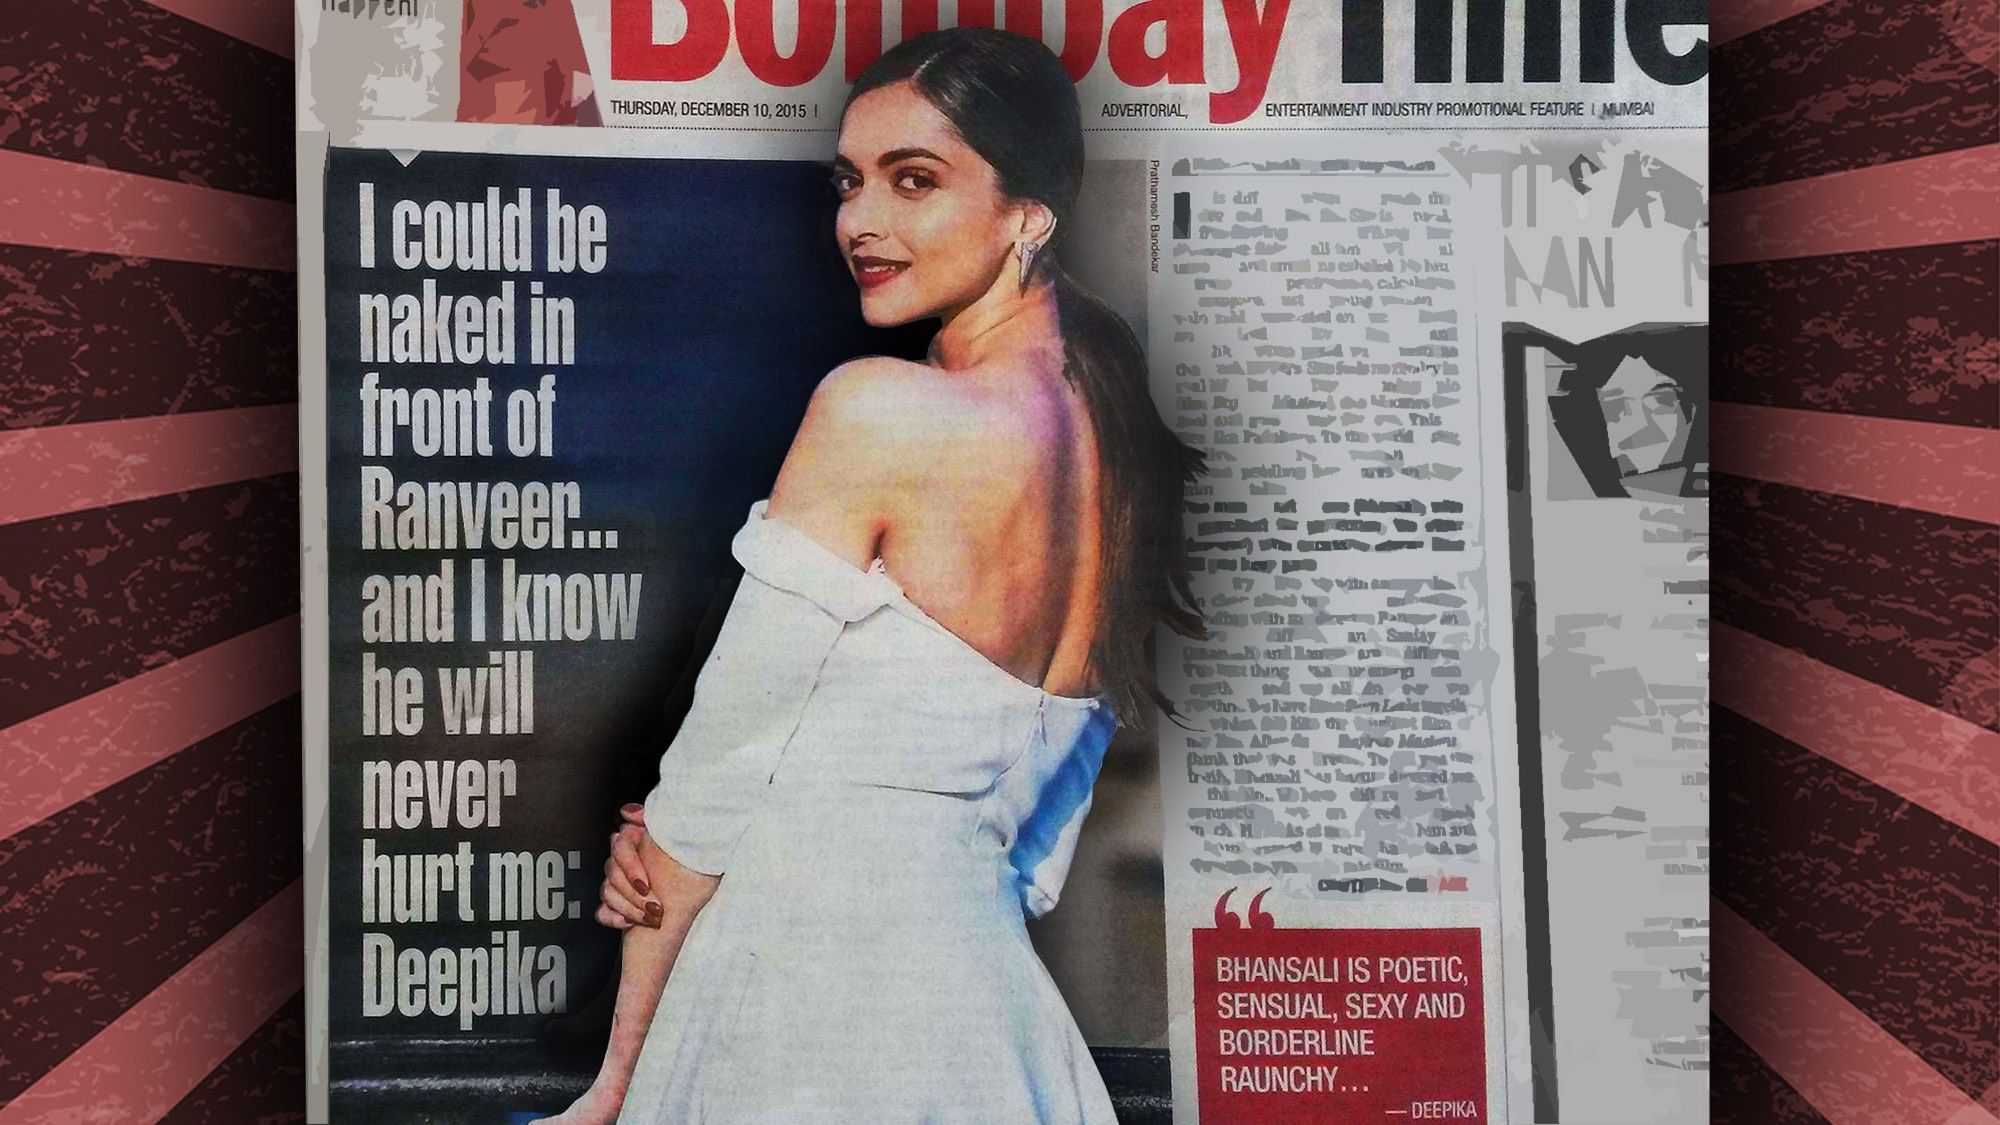 The front page of <i>Bombay Times, </i>December 10, 2015